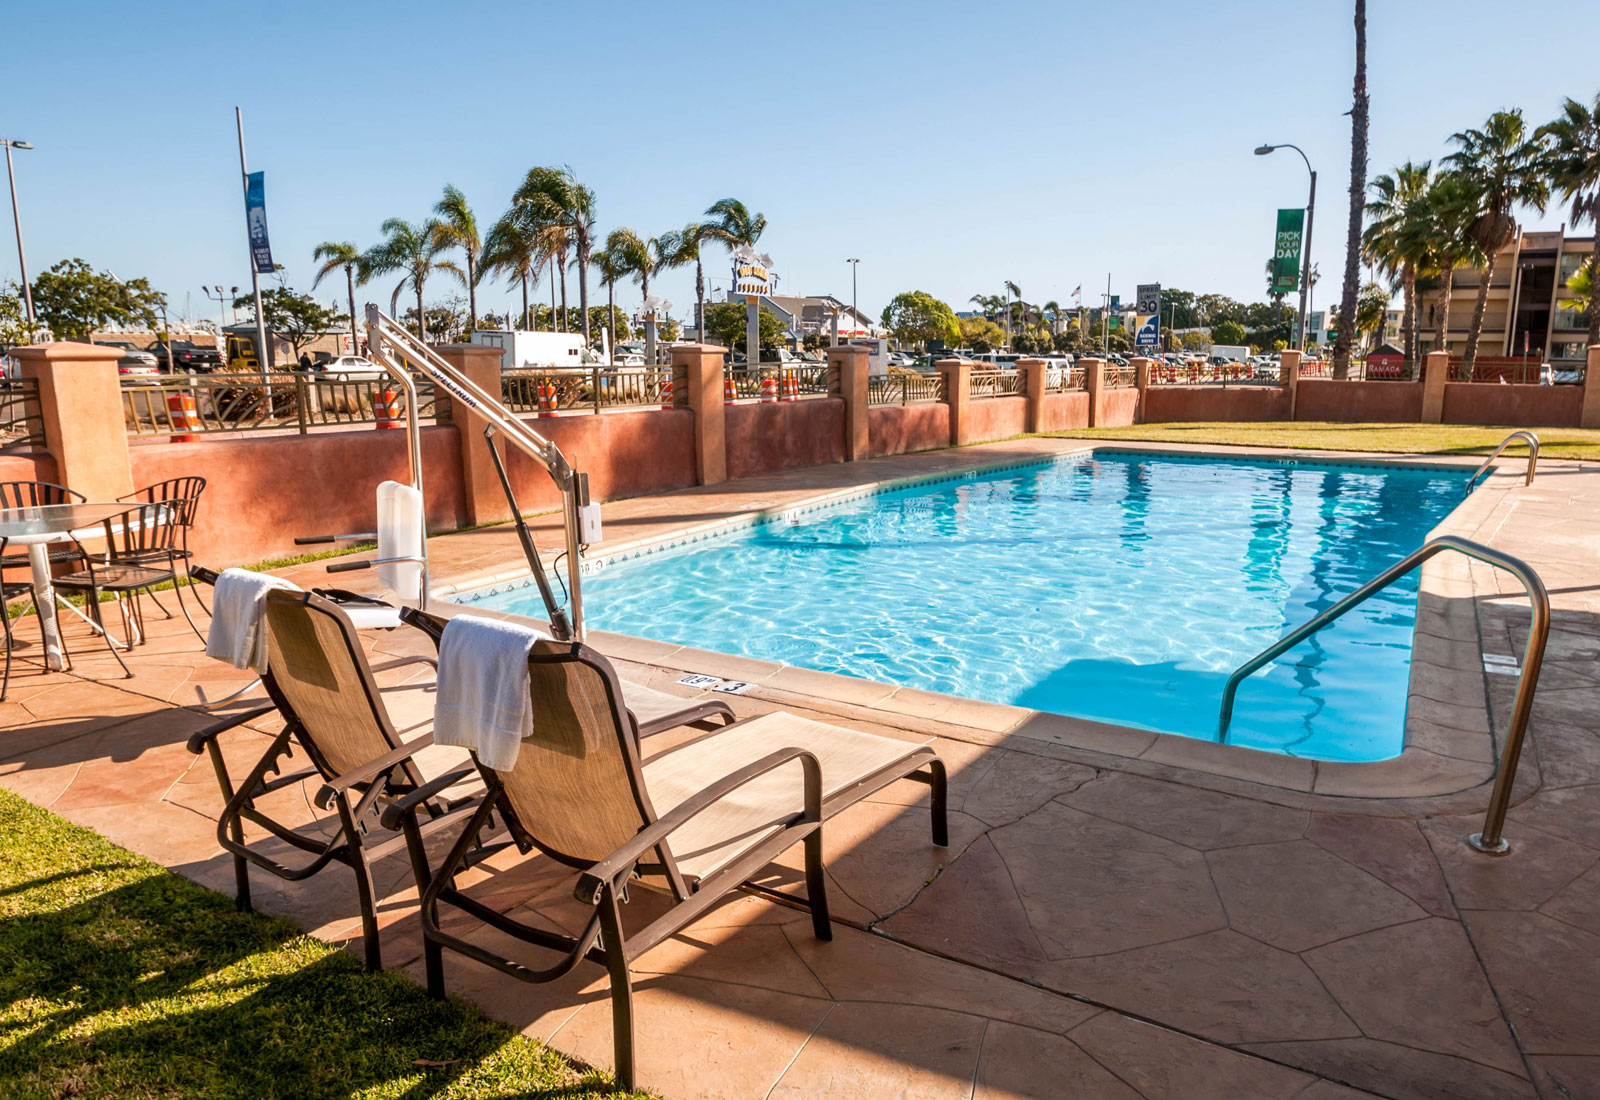 San Diego Sport Fishing Package - Comfort Inn San Diego Airport at the  Harbor